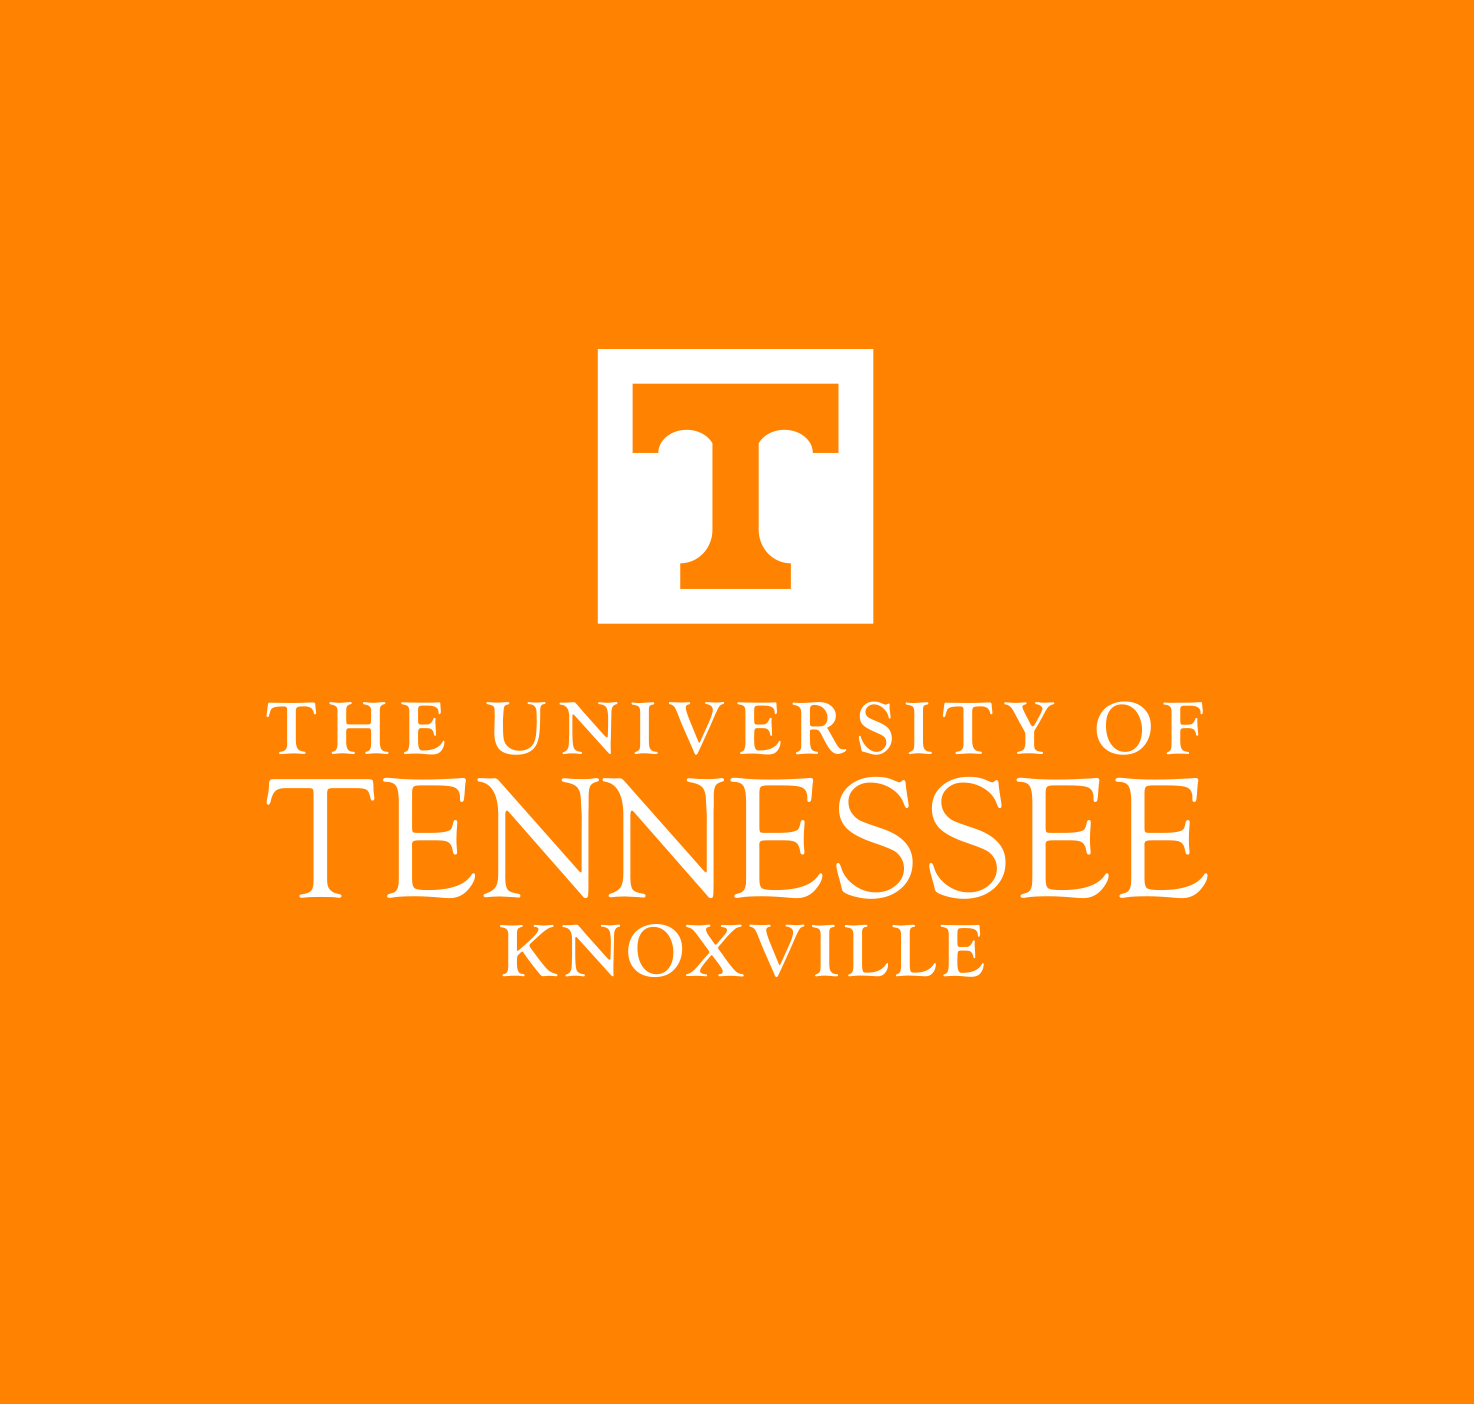 University of Tennessee Knoxville